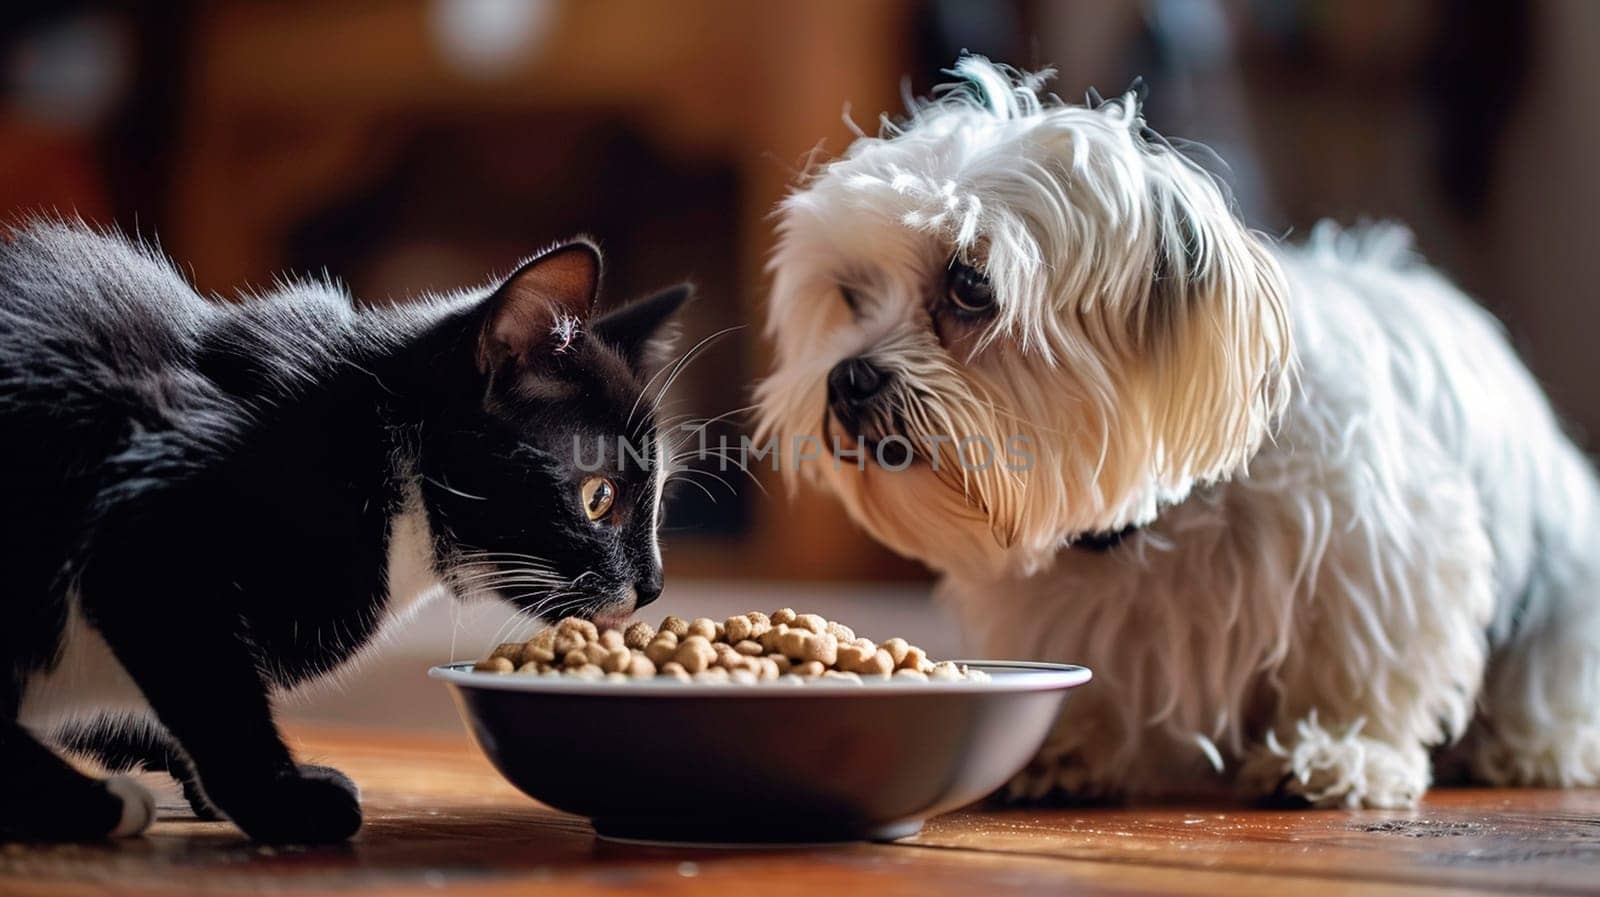 A dog and a cat eat from the same plate. Selective focus. Food.